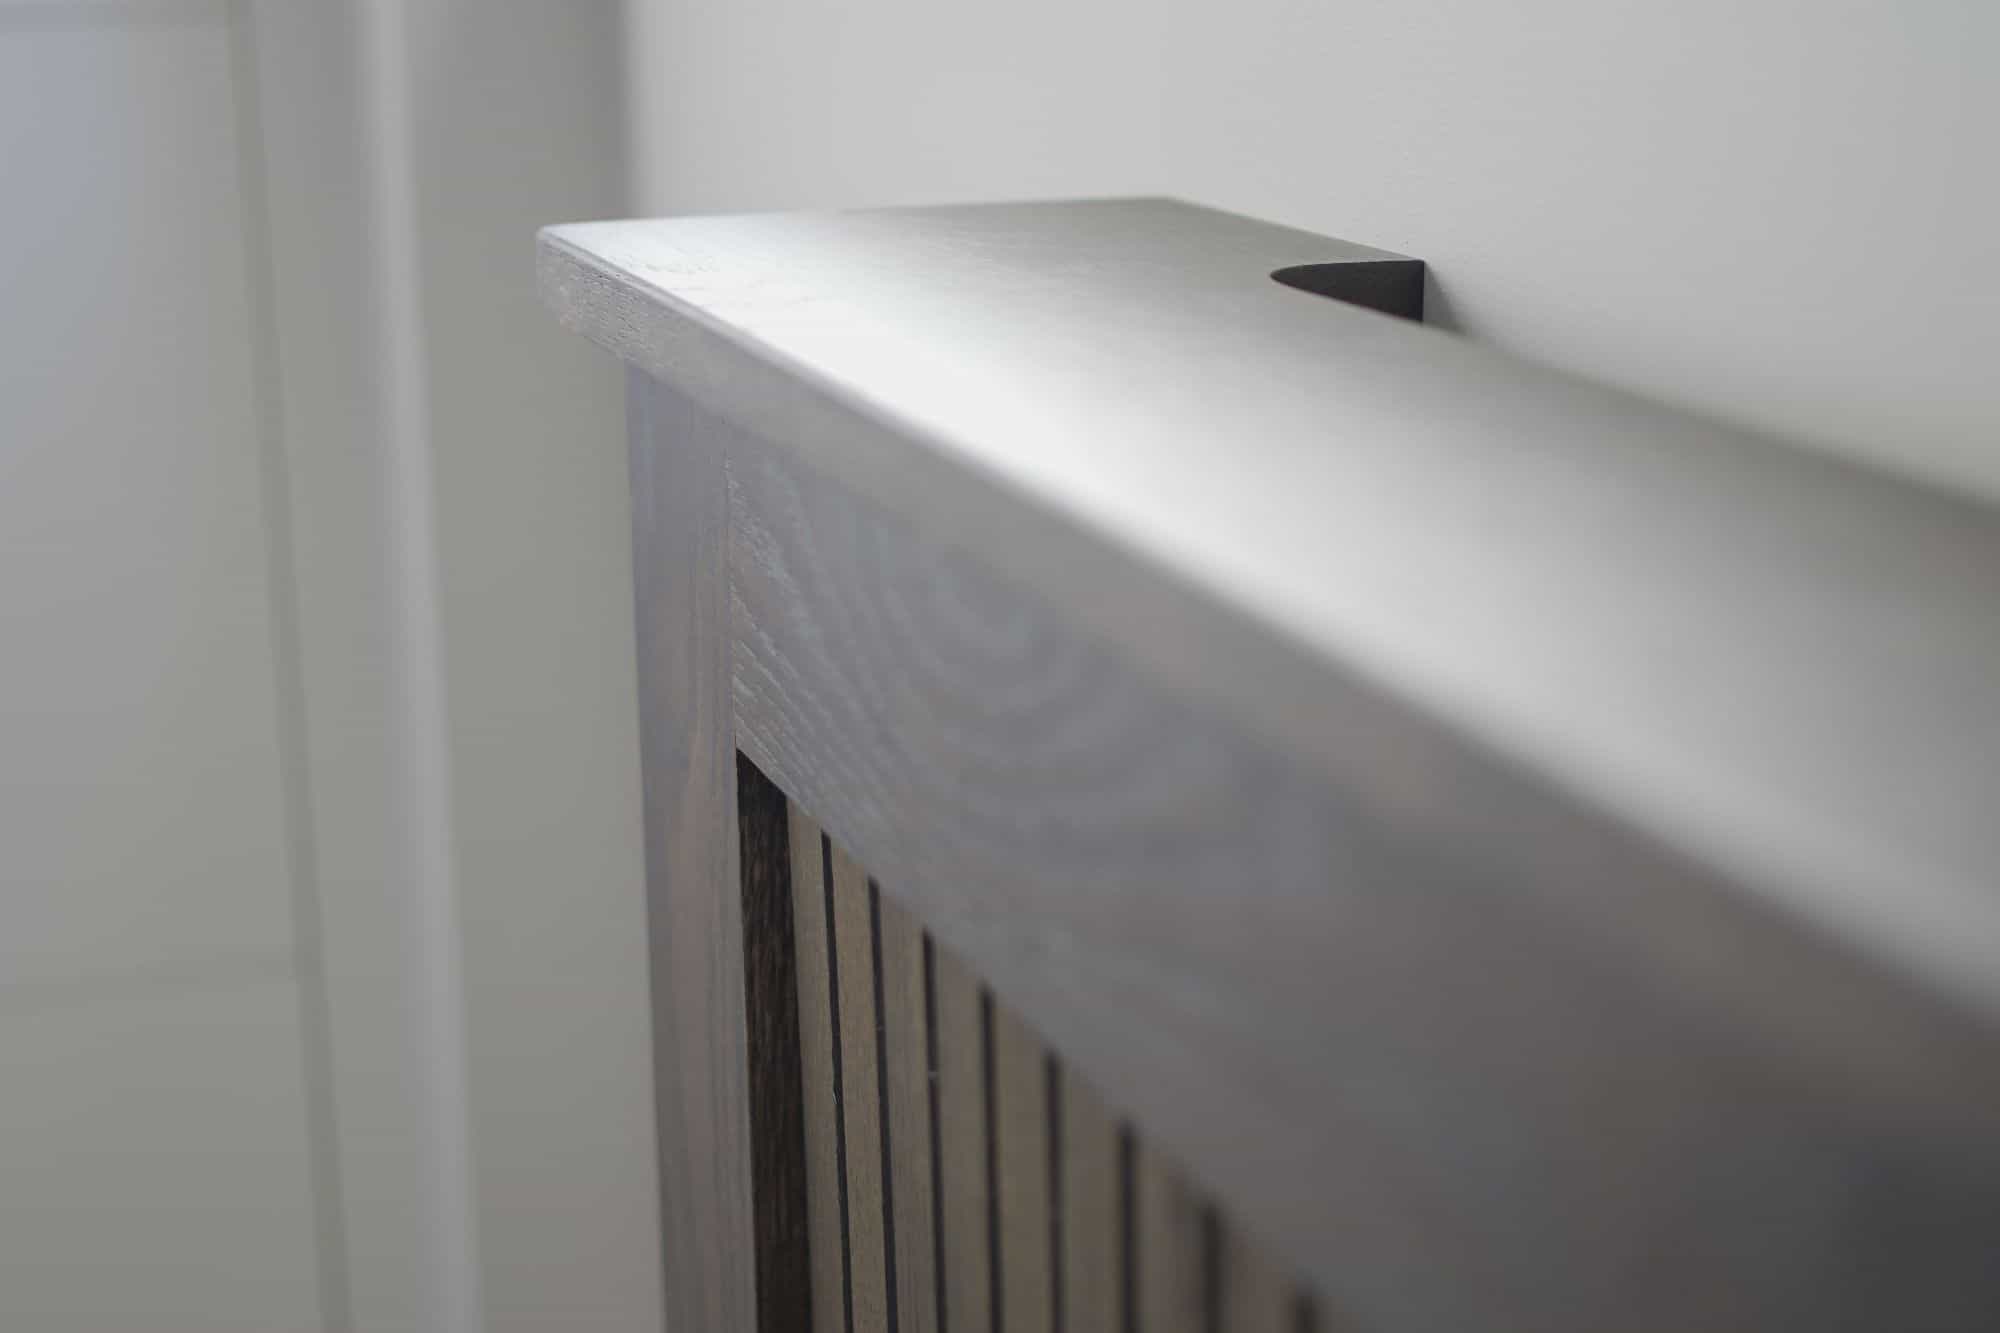 Close up of a mahogany radiator cover, showing the shelf and the grills